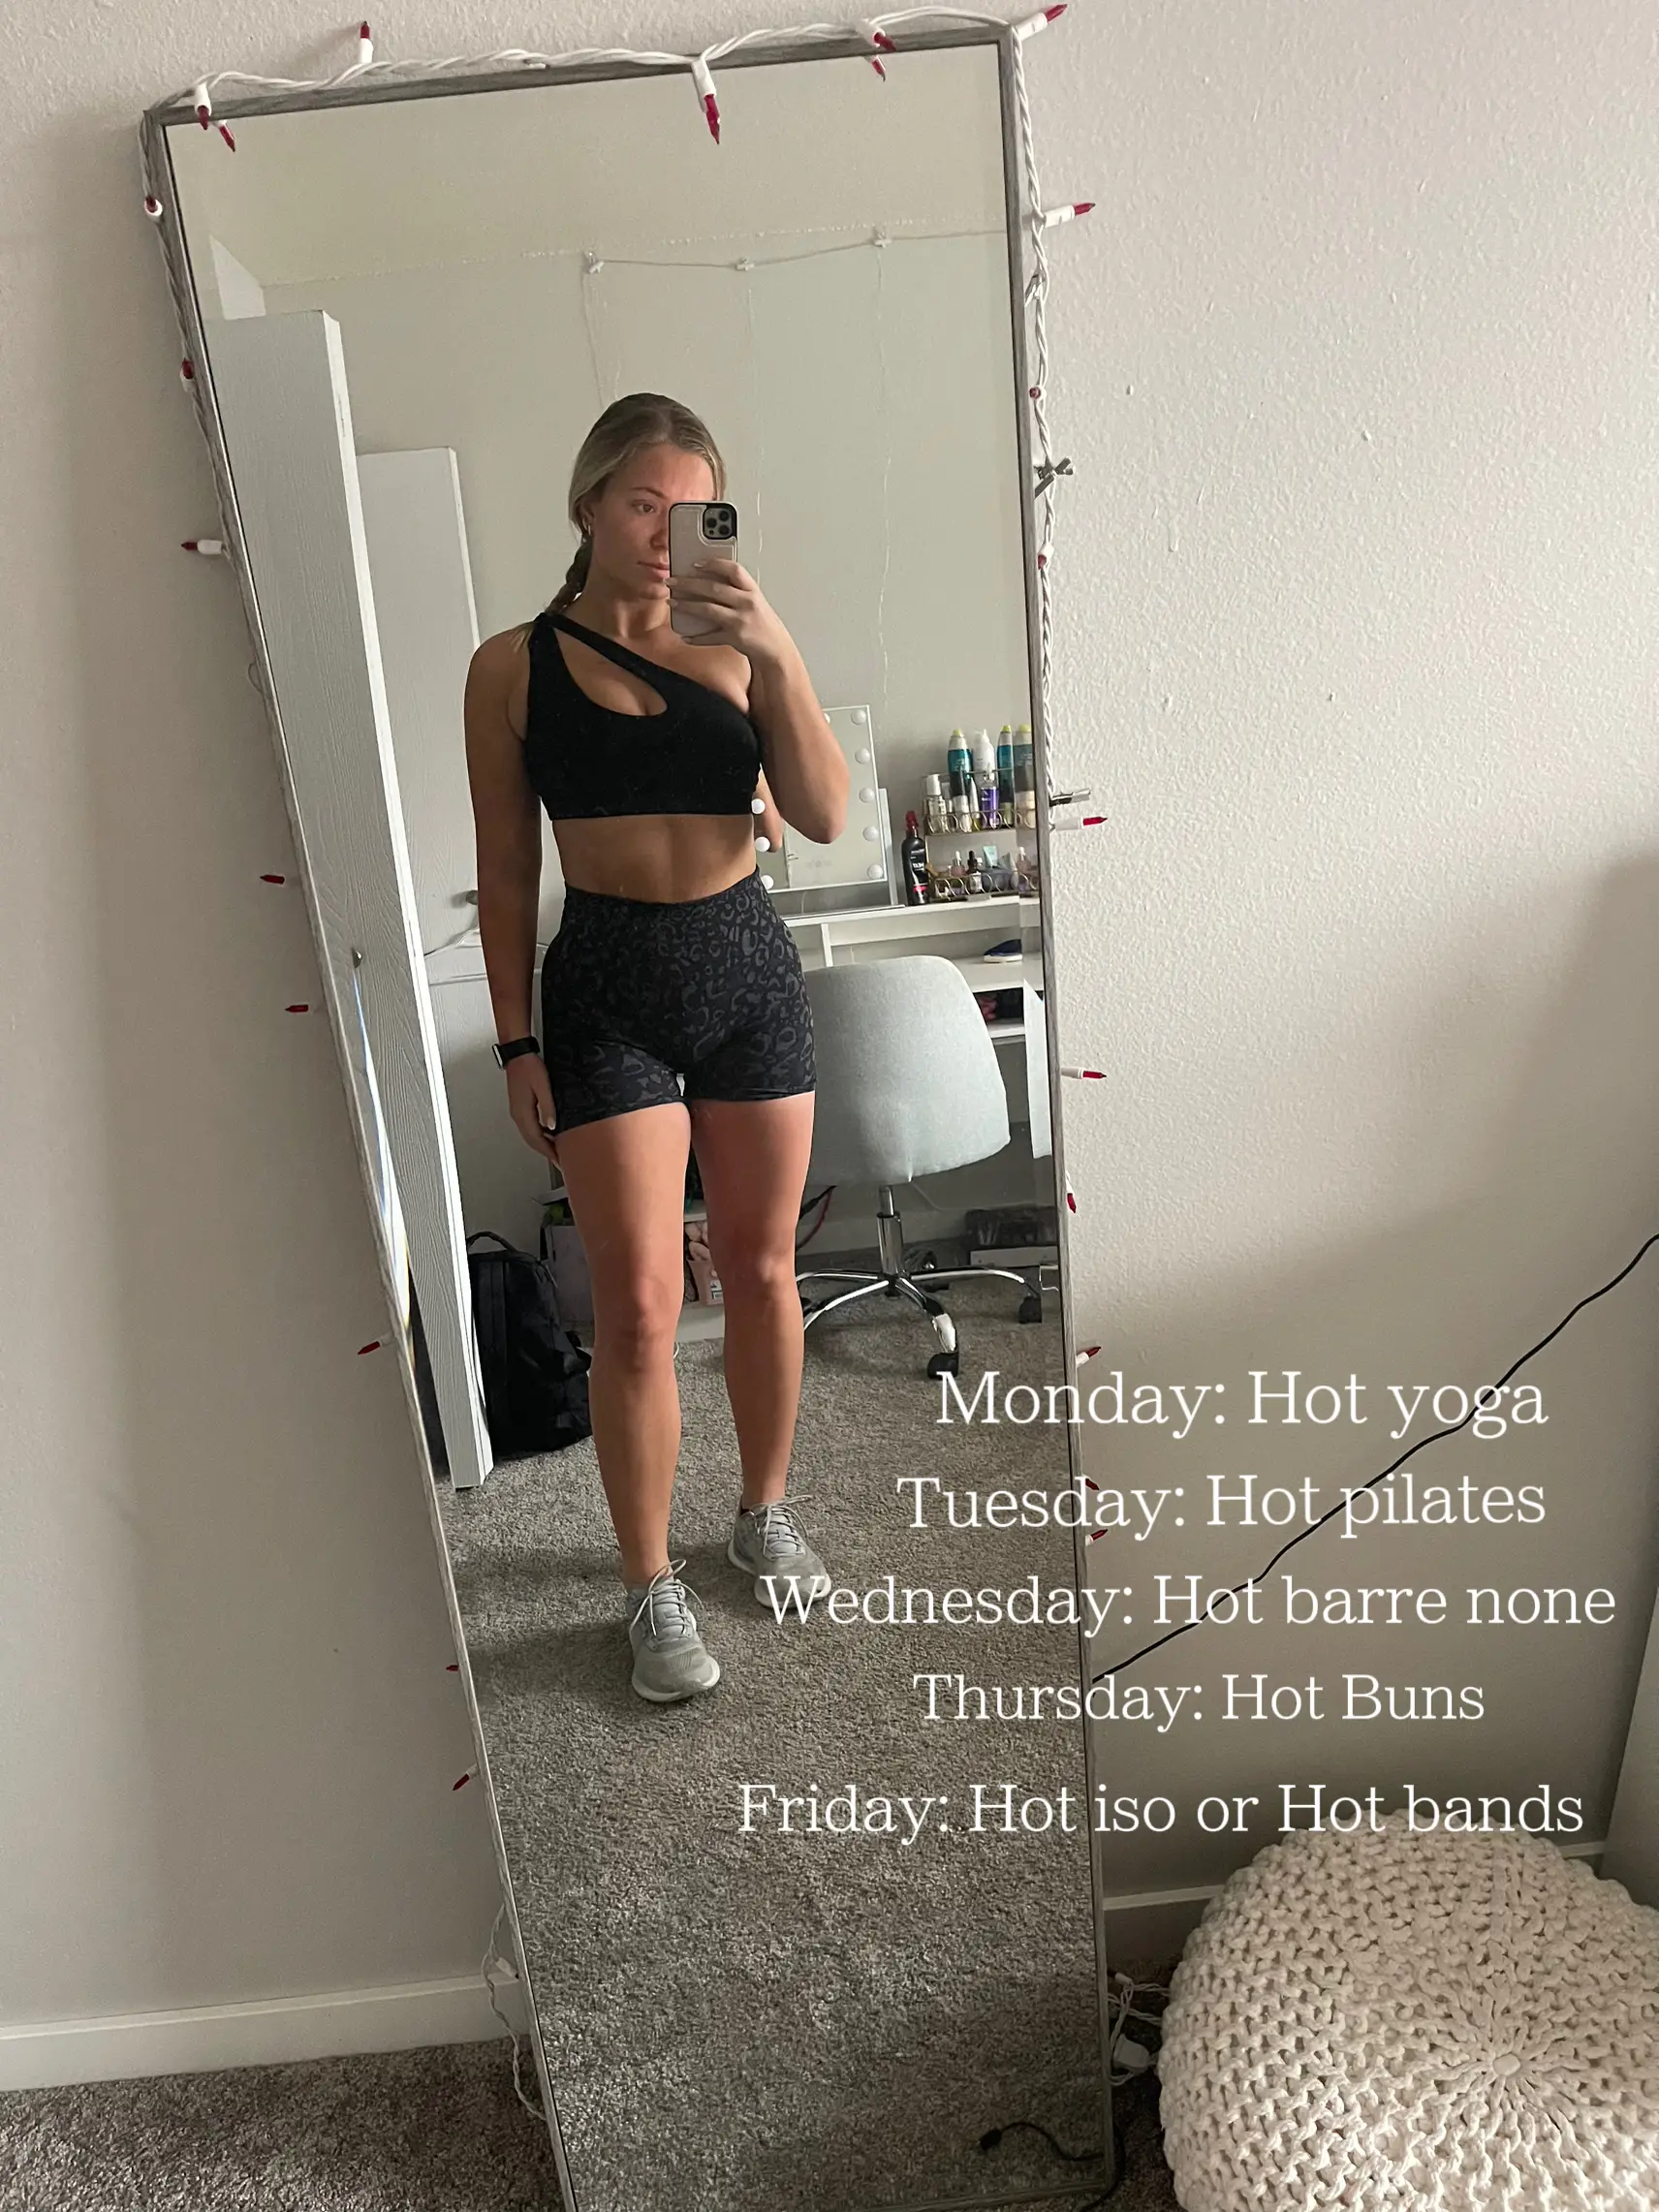 HOTWORX - Comment below which HOTWORX session you are going to